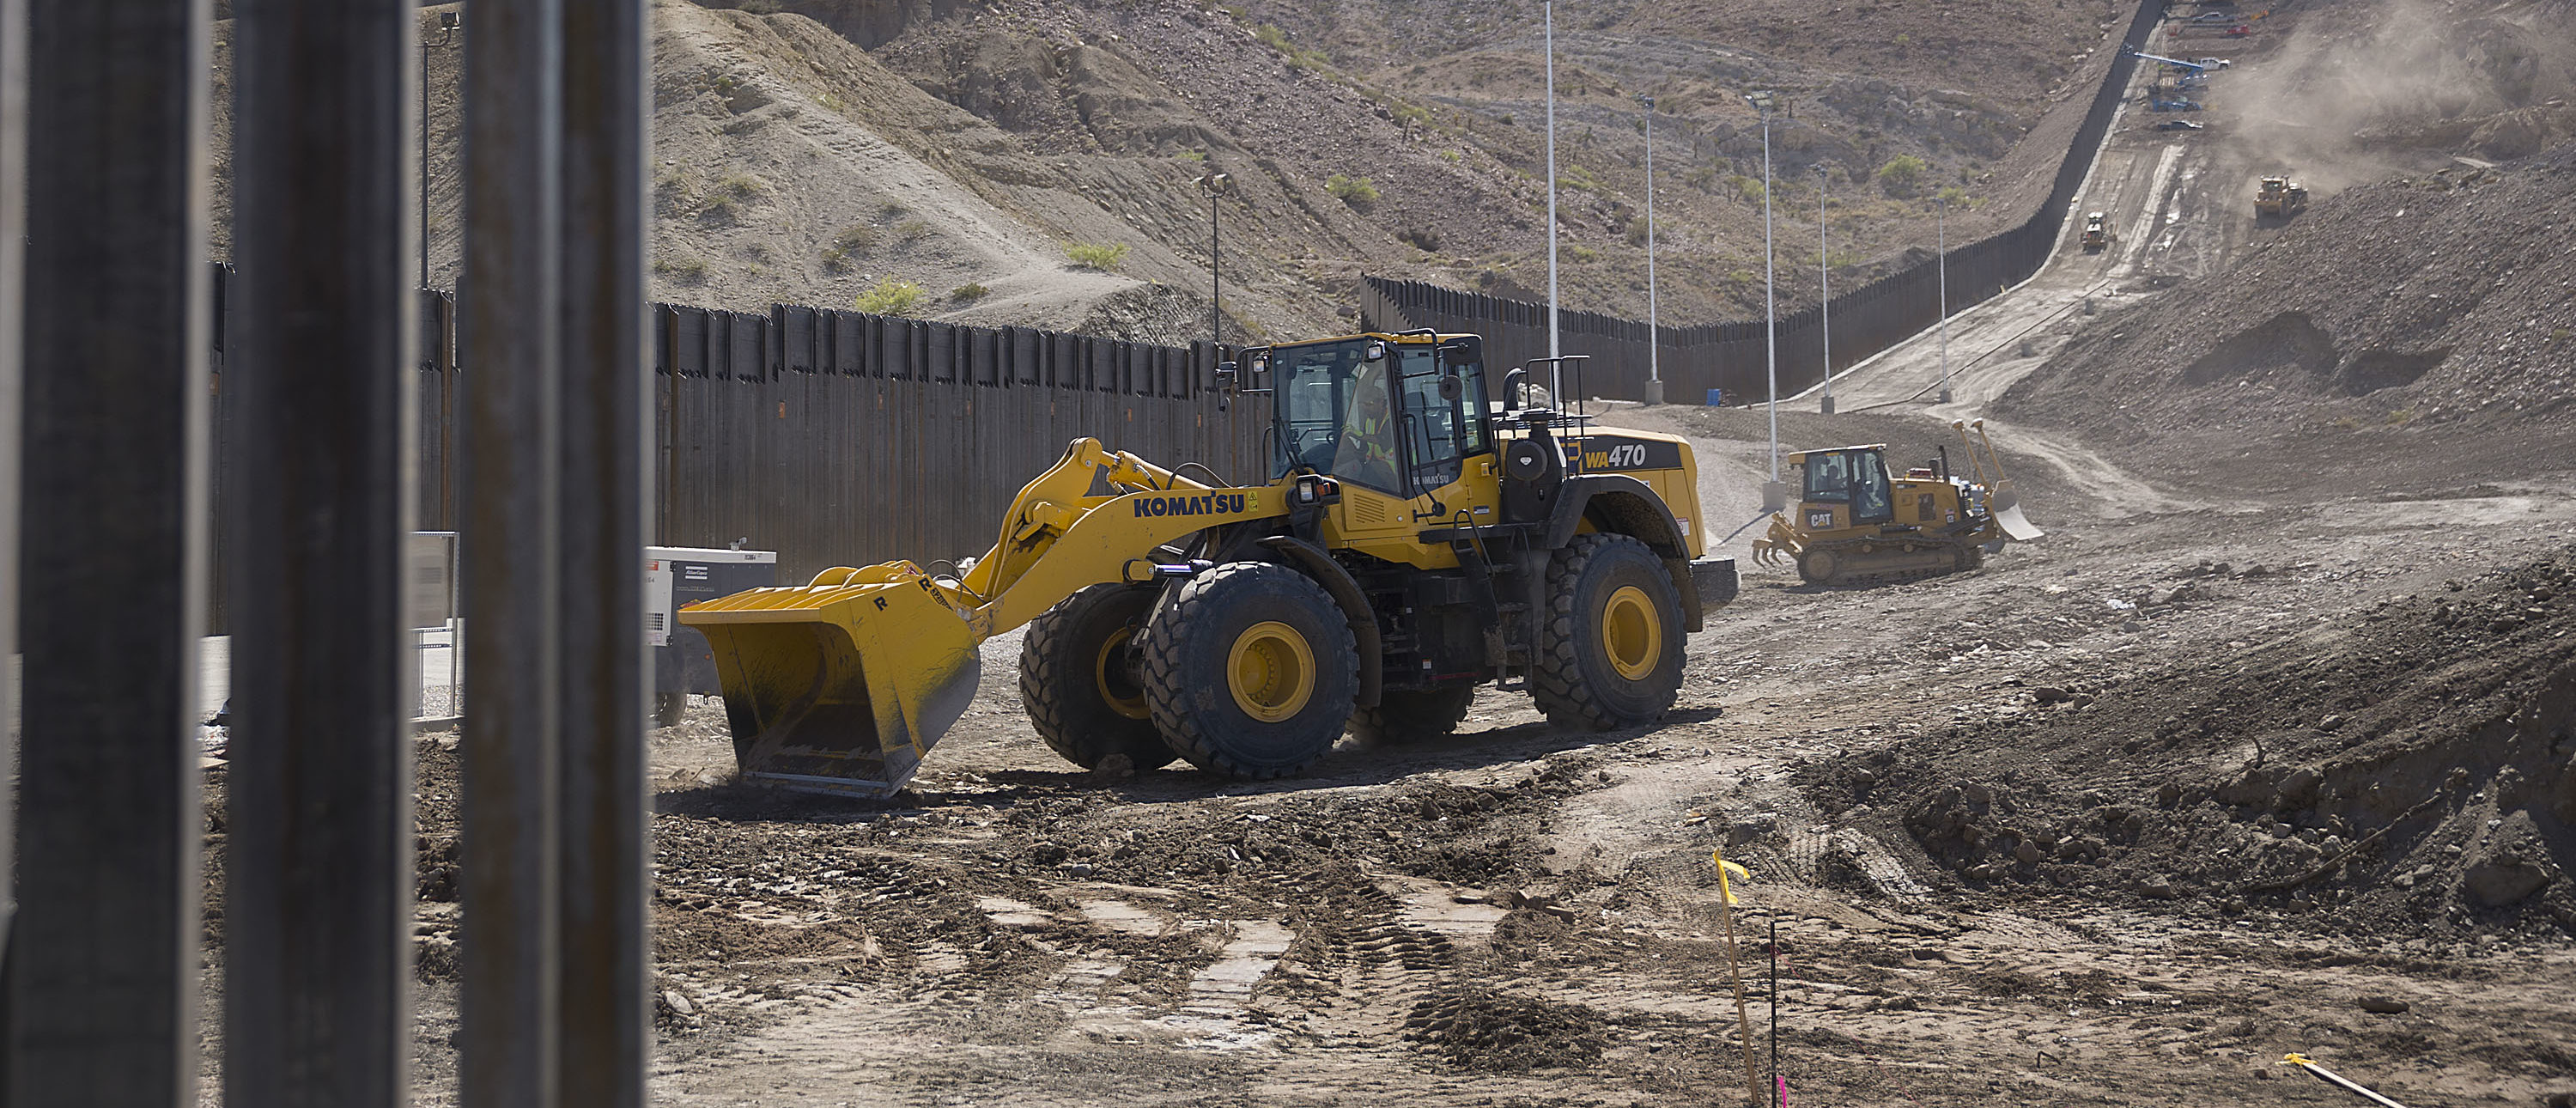 Construction crews work on a border wall on June 01, 2019 in Sunland Park, New Mexico. (Joe Raedle/Getty Images)